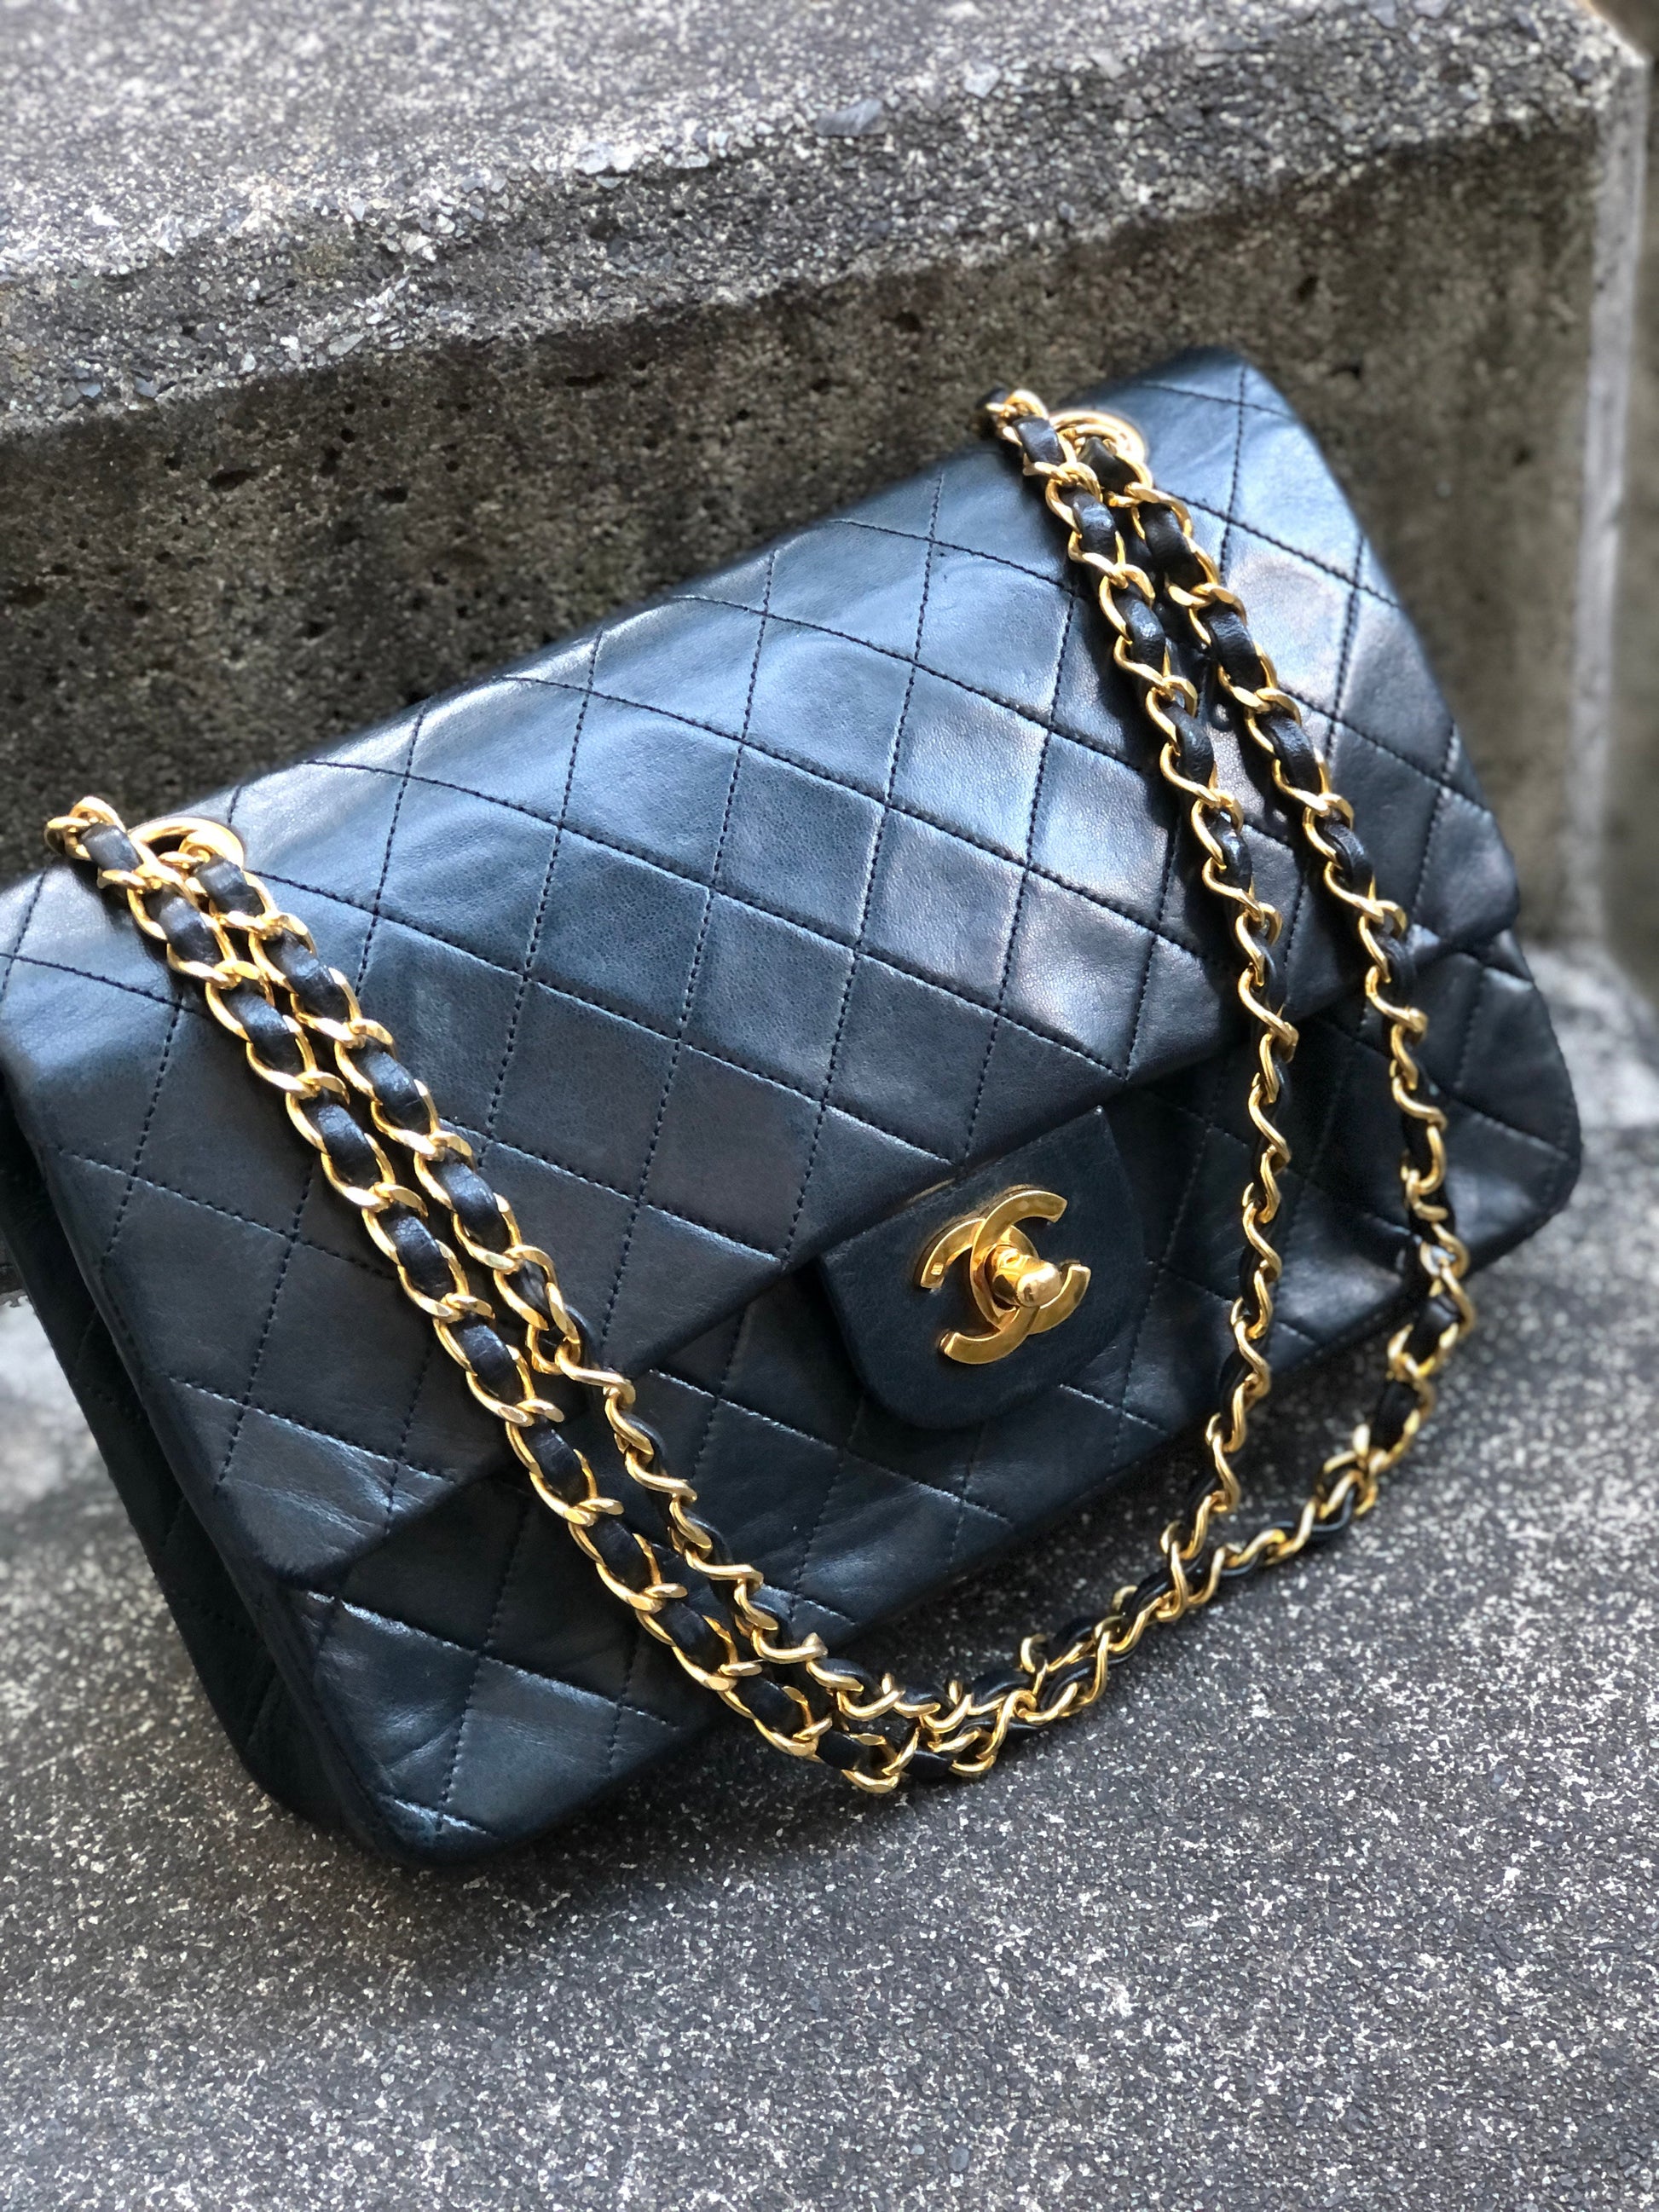 Chanel Multicolor Metallic Quilted Goatskin Mermaid 2.55 Reissue 226 Double  Flap Bag Gold Hardware, 2020 Available For Immediate Sale At Sotheby's